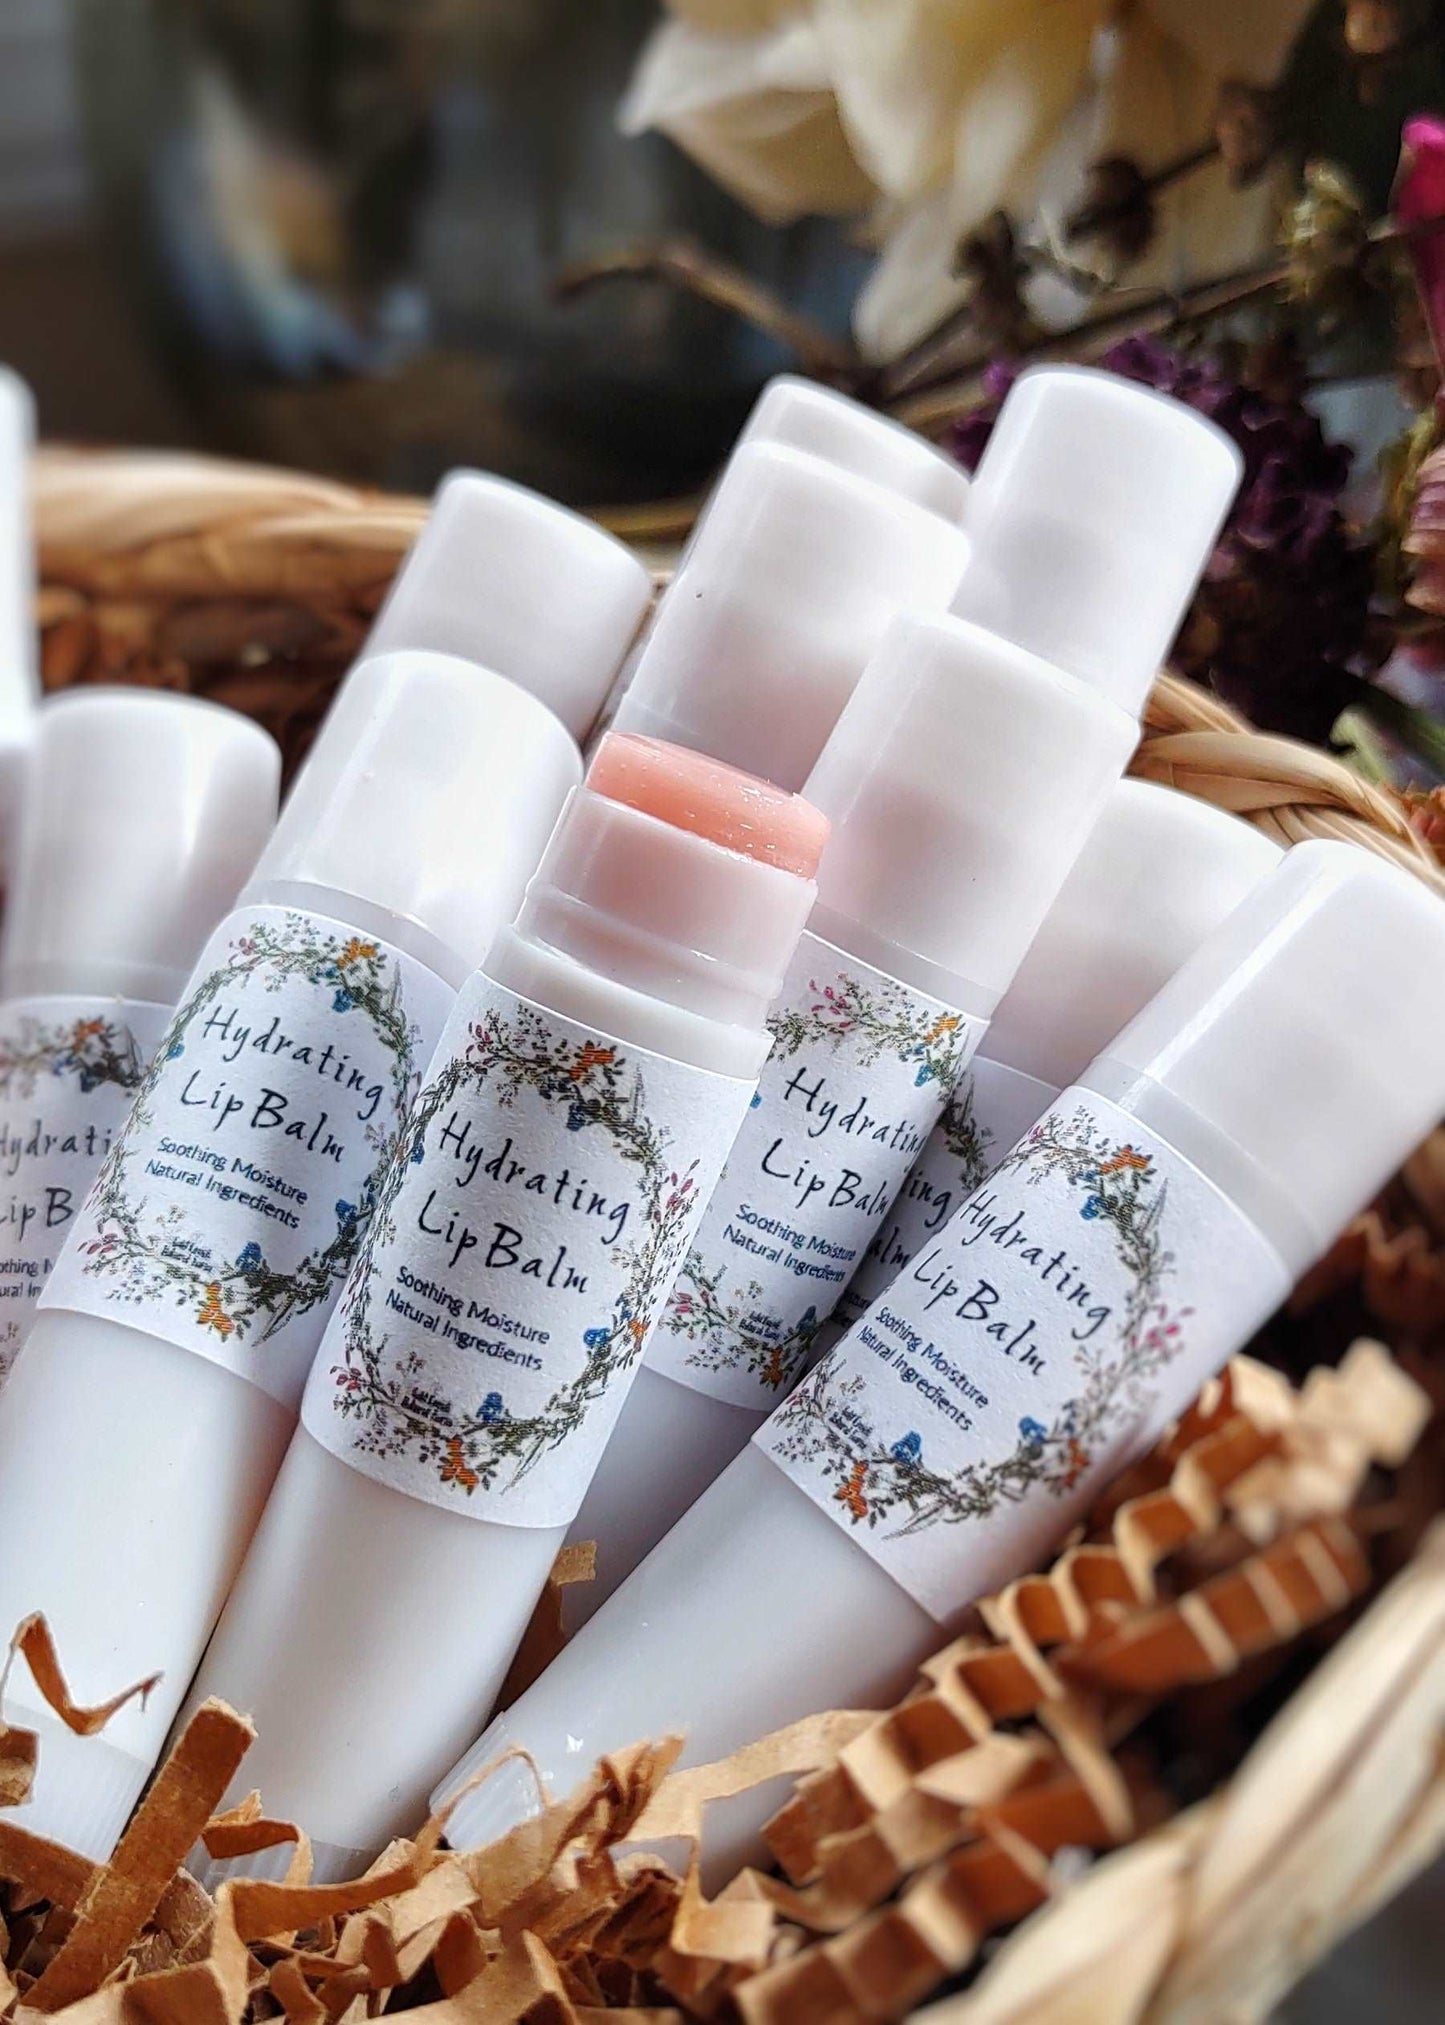 LIP BALM STICK - Soothing Moisture - Handcrafted - Cold Creek Natural Farm